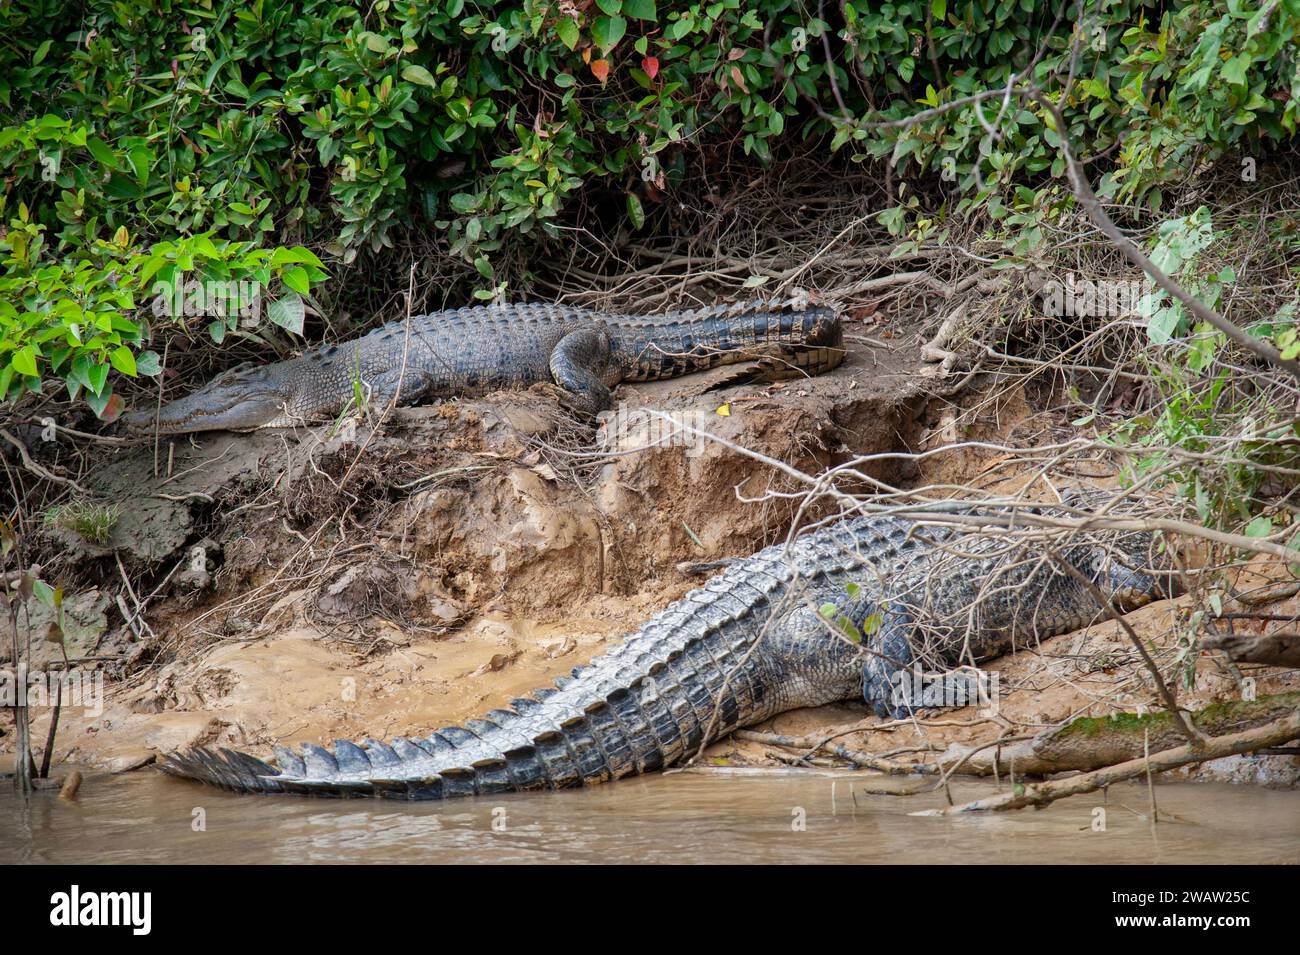 A pair of saltwater crocodiles rest on the banks of the Daintree River in Cape Tribulation in Far North Queensland in Australia. Stock Photo